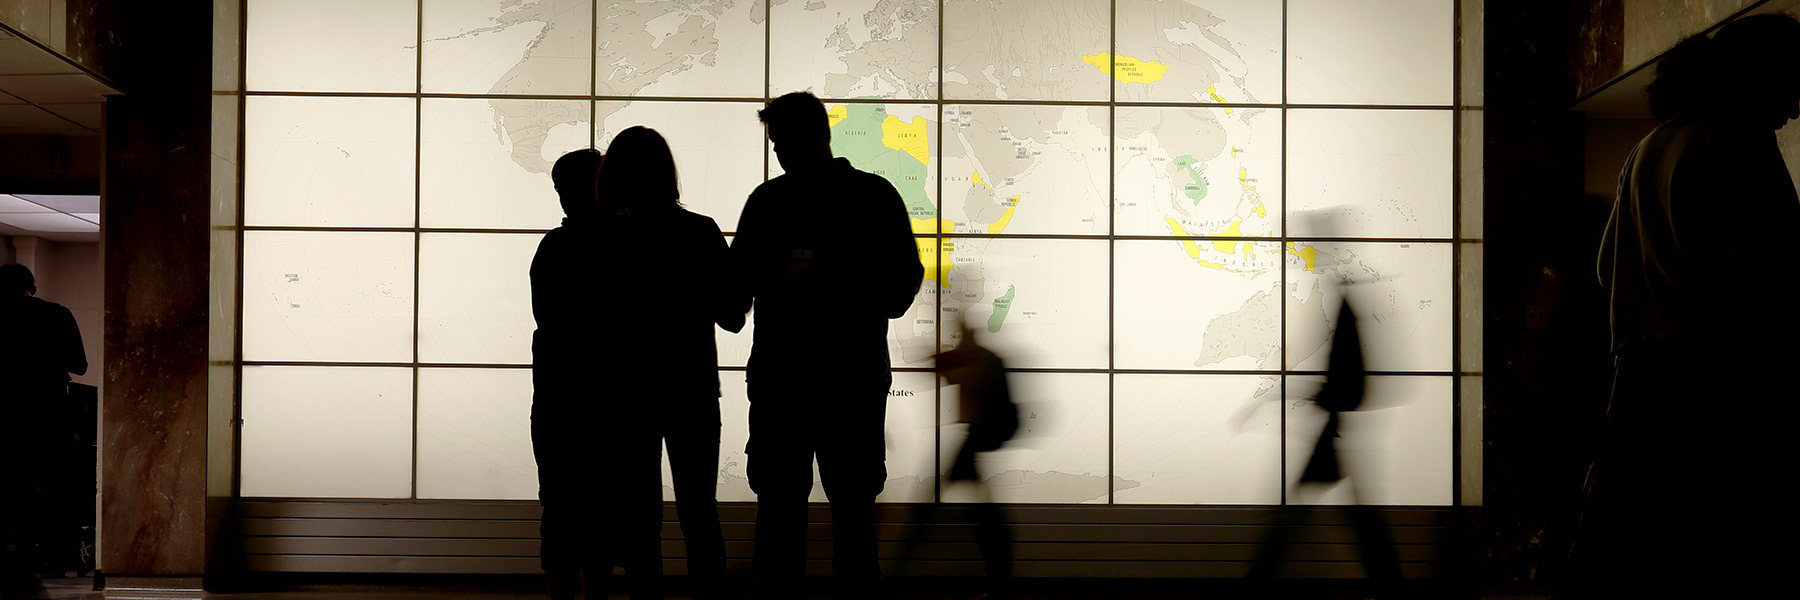 Three people are silhouetted in front of a world map.